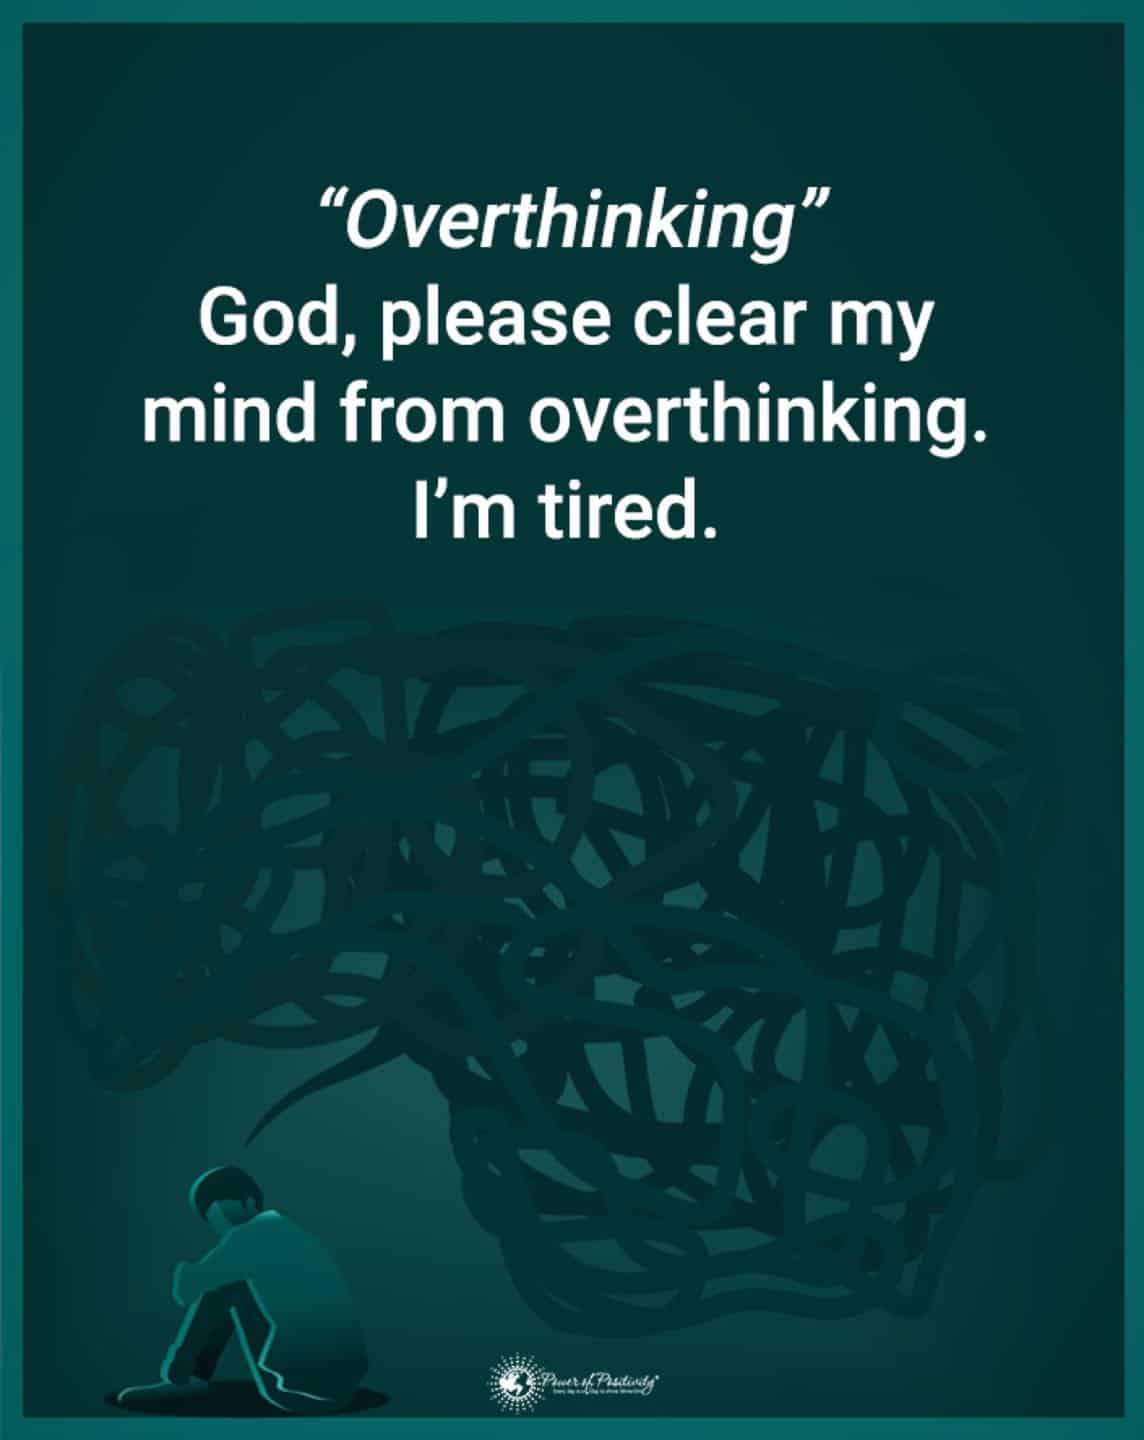 overthinking too much